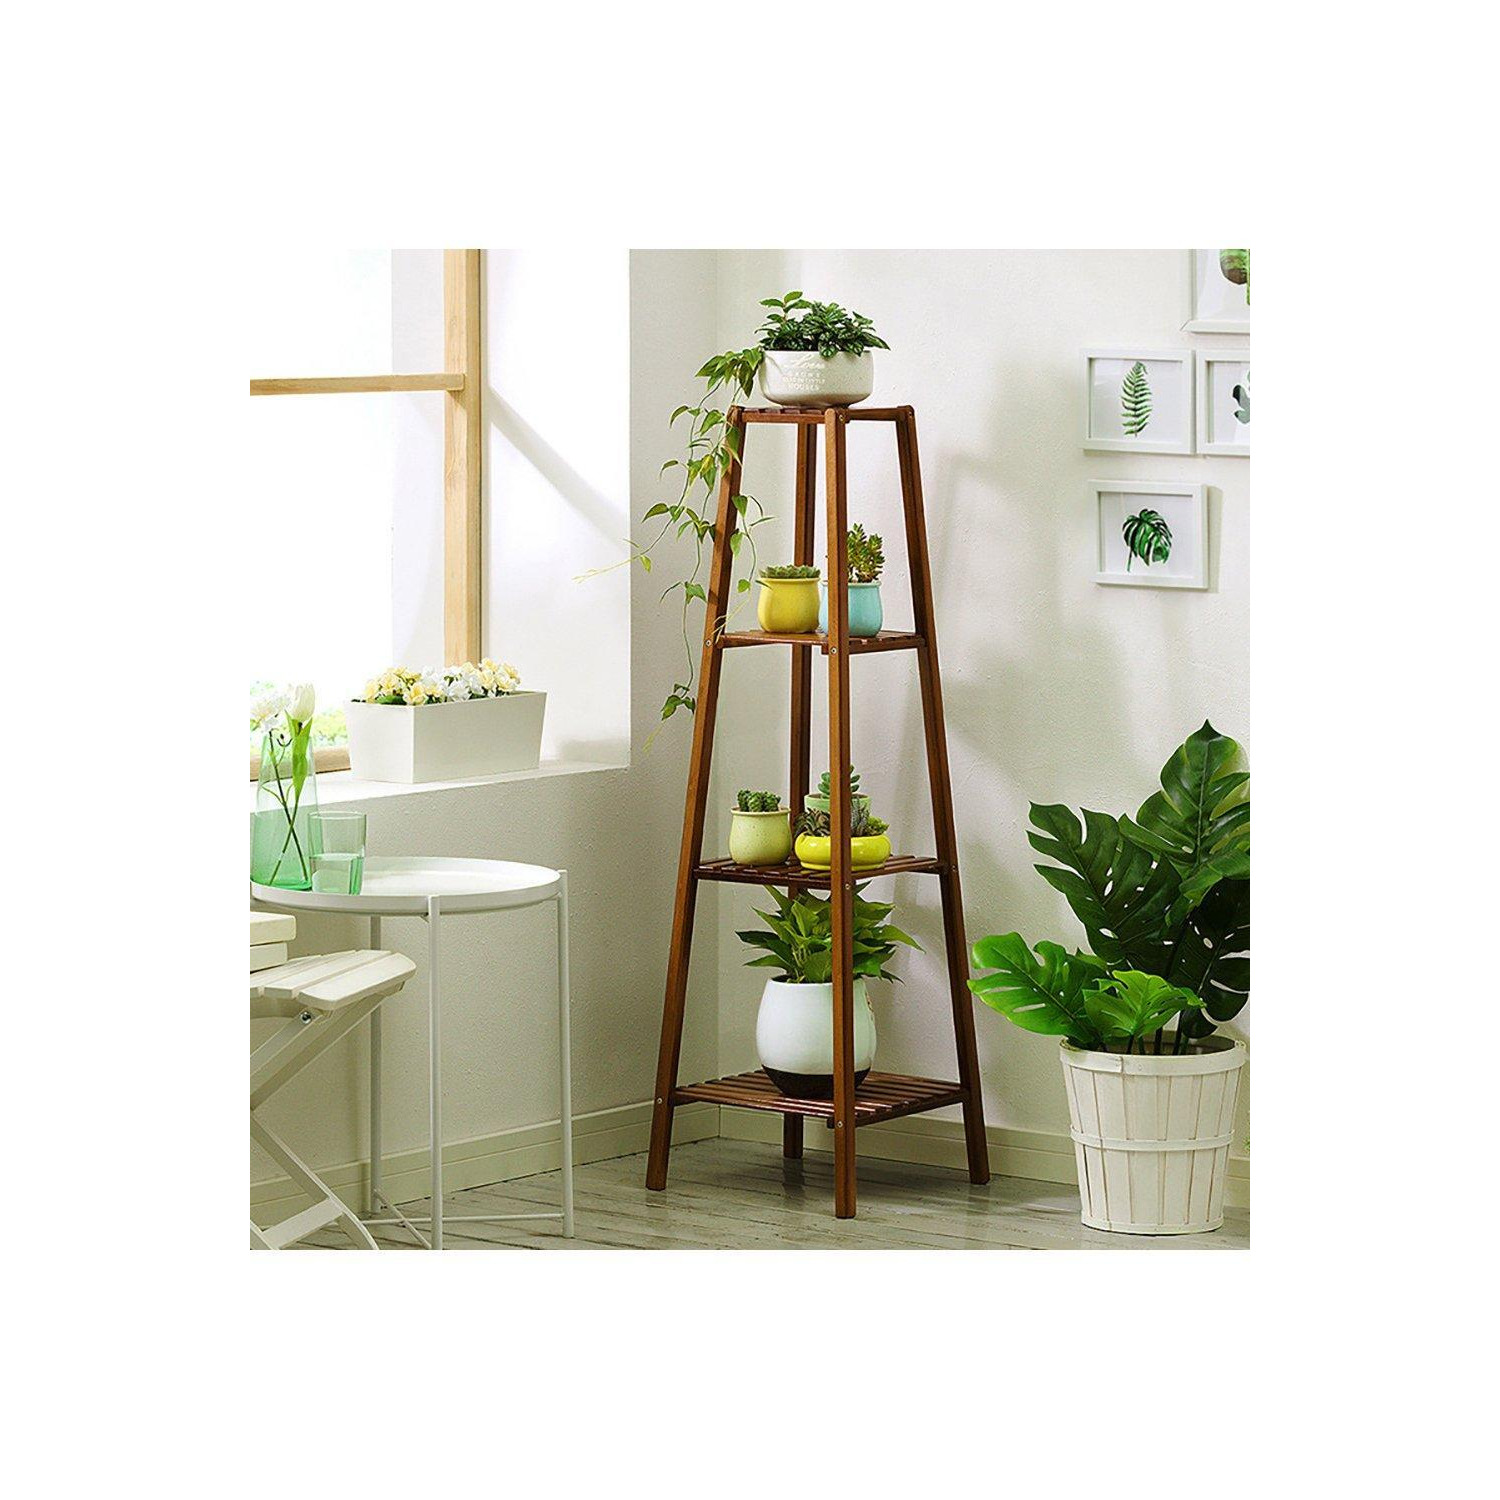 4 tier Antlia Free Form Multi Tiered Plant Stand - image 1